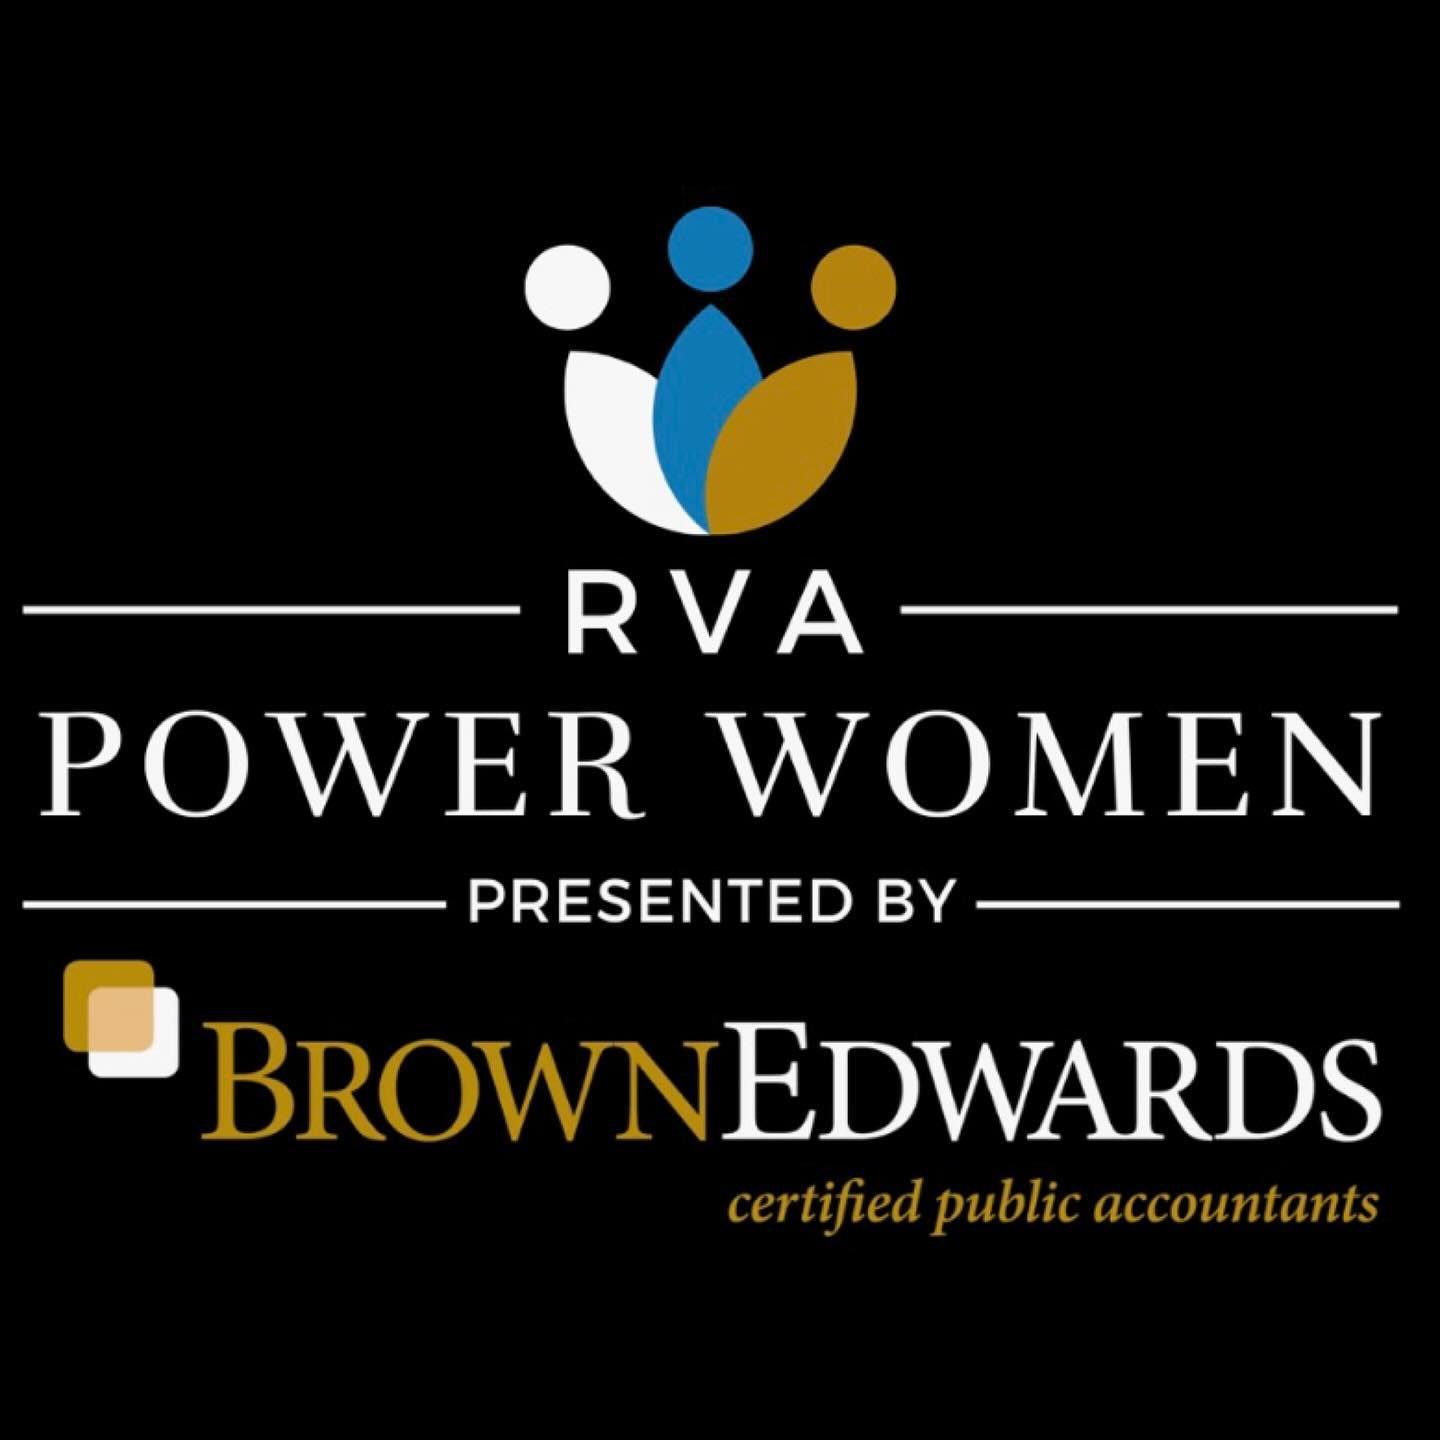 We&rsquo;d like to congratulate the following JWC members on being finalist in 2024 RVA Power Women Awards 👏🏾

Shantelle Brown of Hope Pharmacy (@hopepharmacyrva) is finalist in Healthcare 👩🏽&zwj;⚕️

Kimberly Love-Lindsey of The Lindsey Food Grou